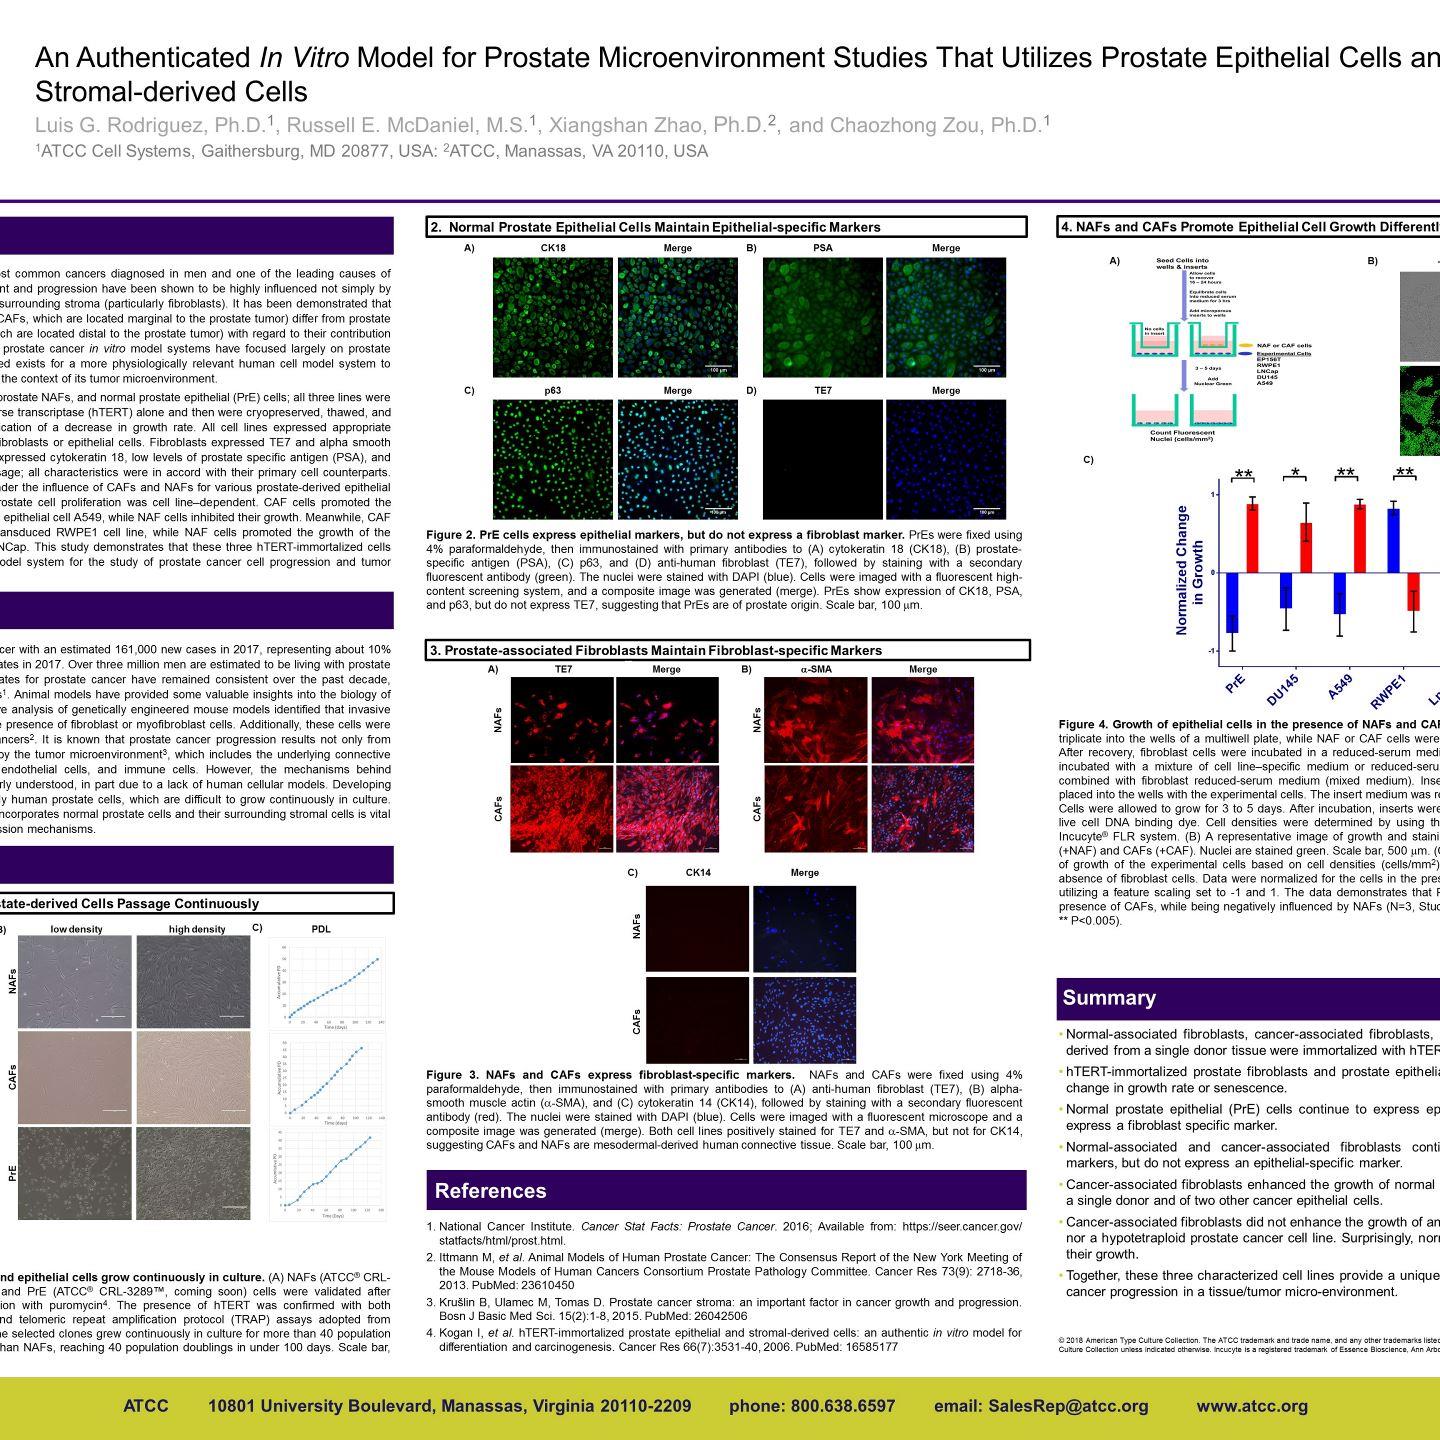 AACR 2018 Poster Prostate Microenvironment